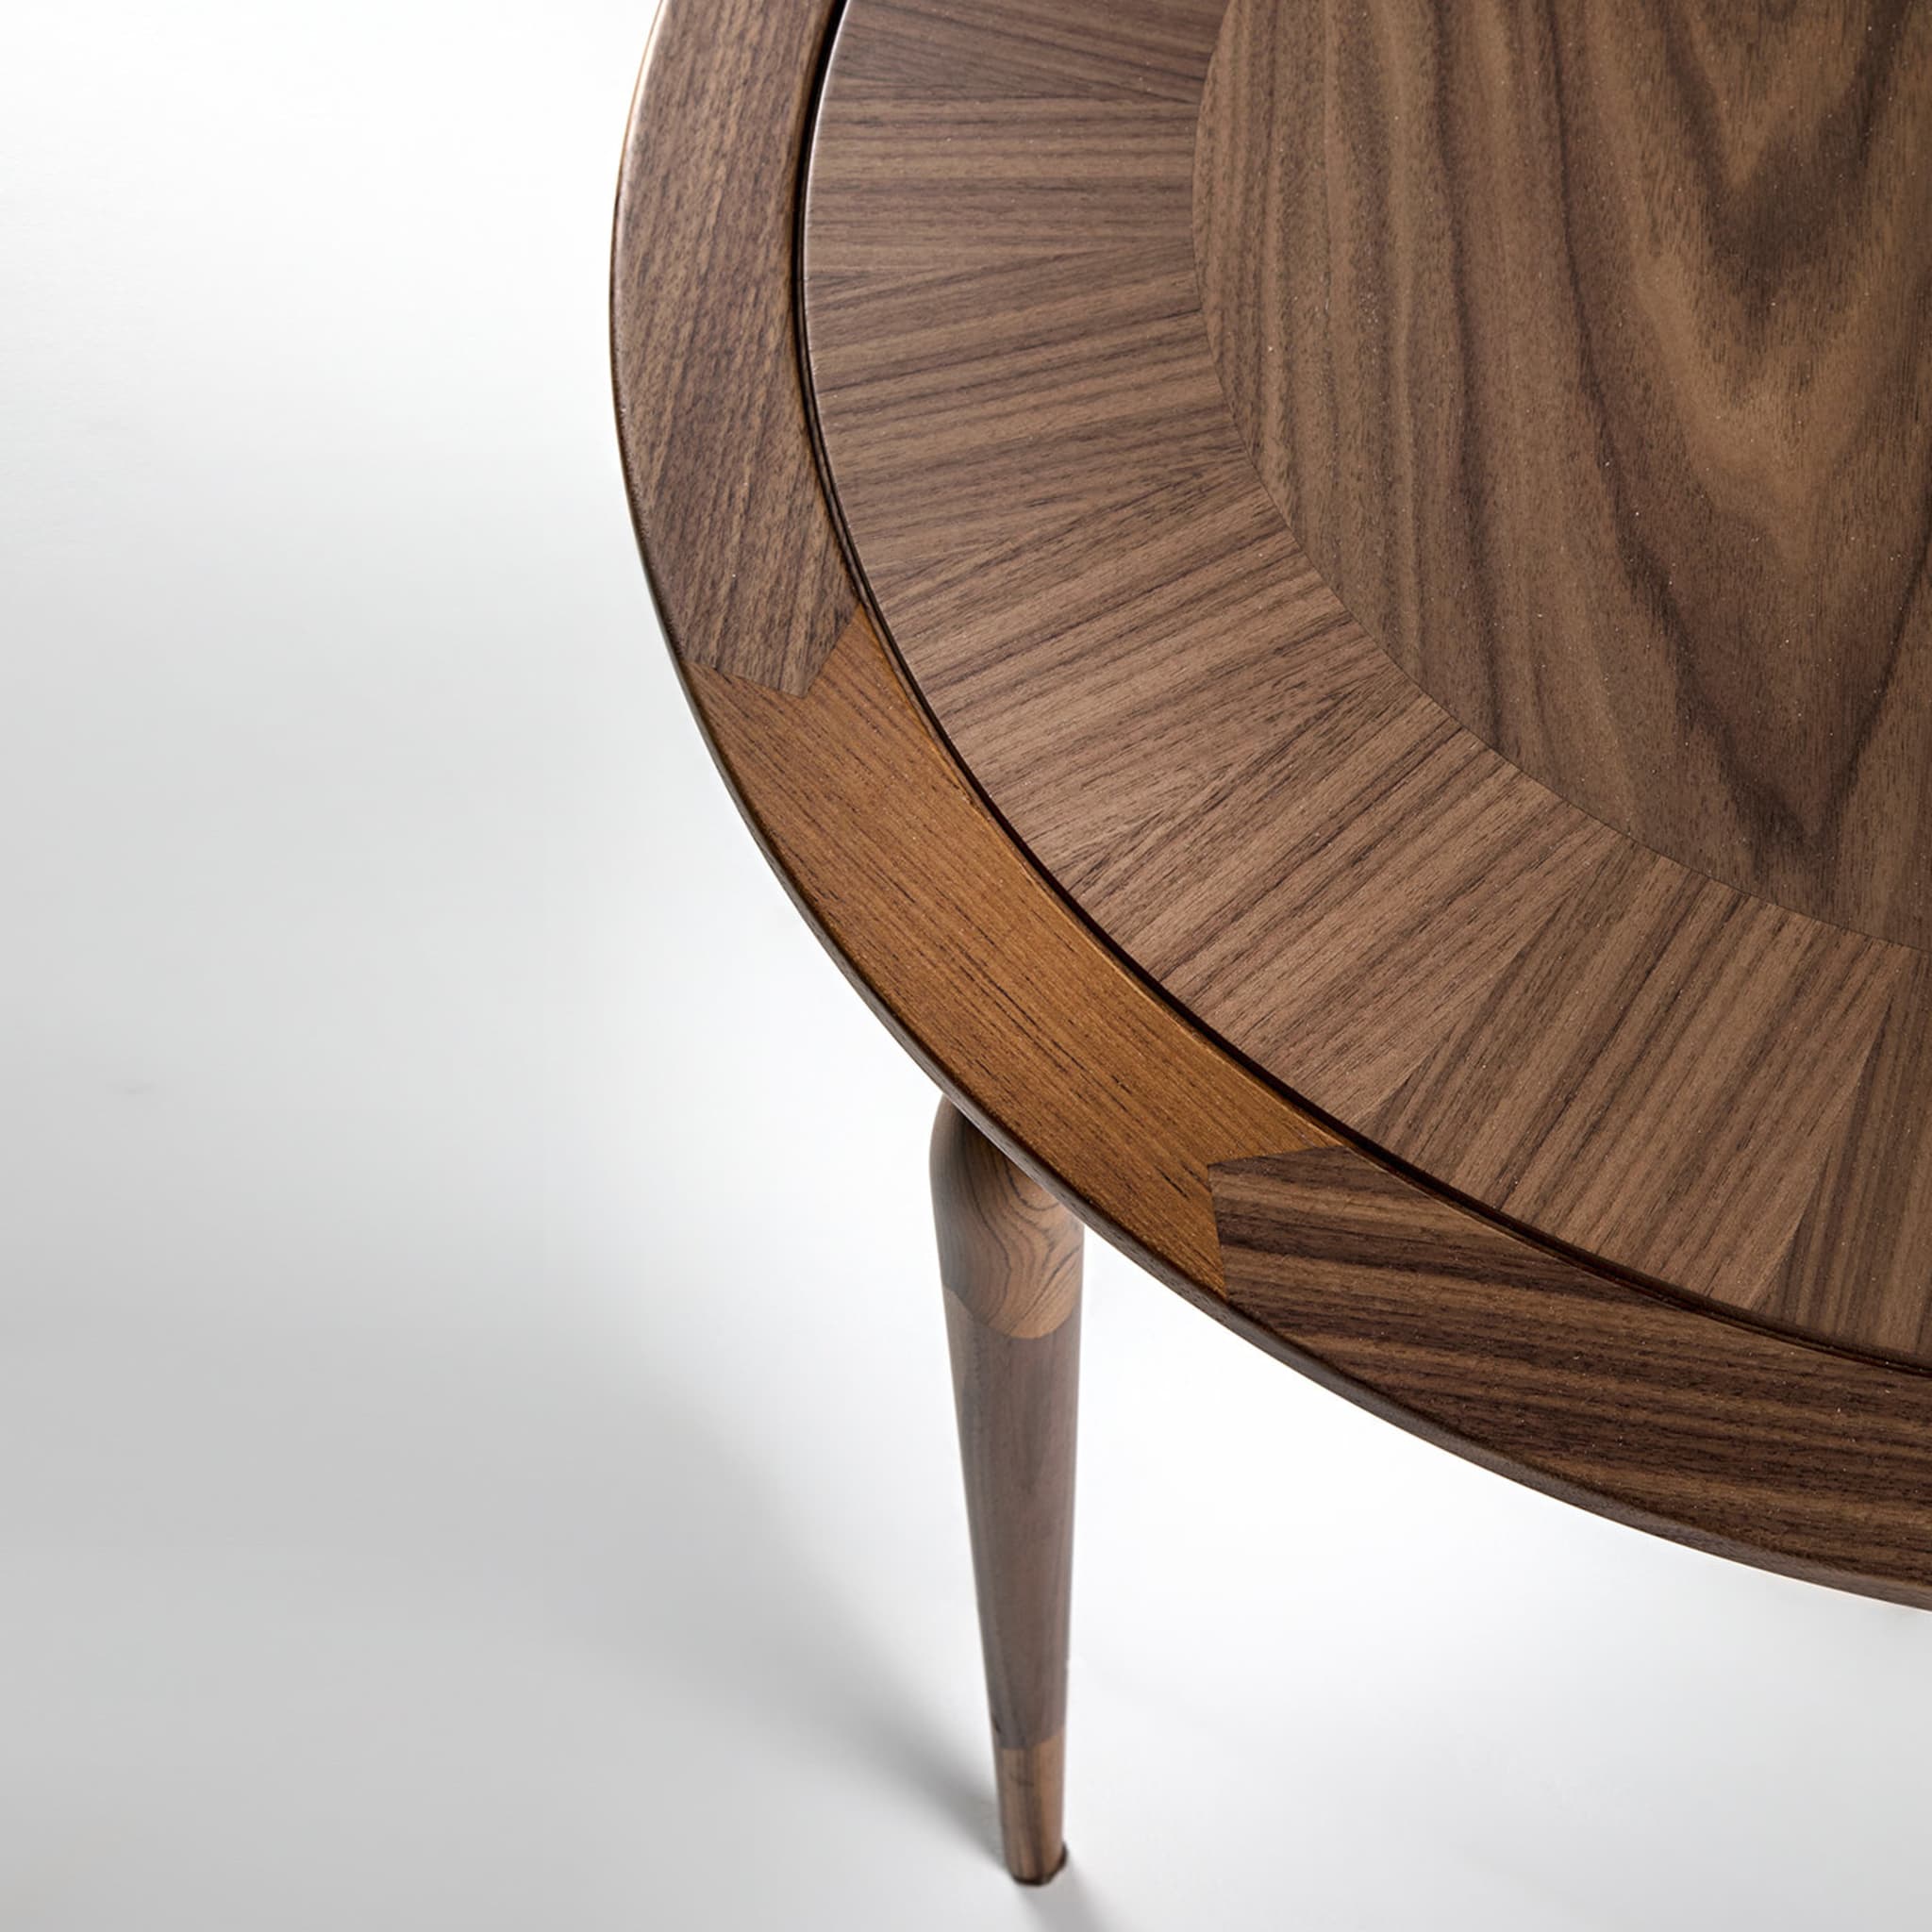 Rosetta Side Table by Luciano Colombo - Alternative view 4